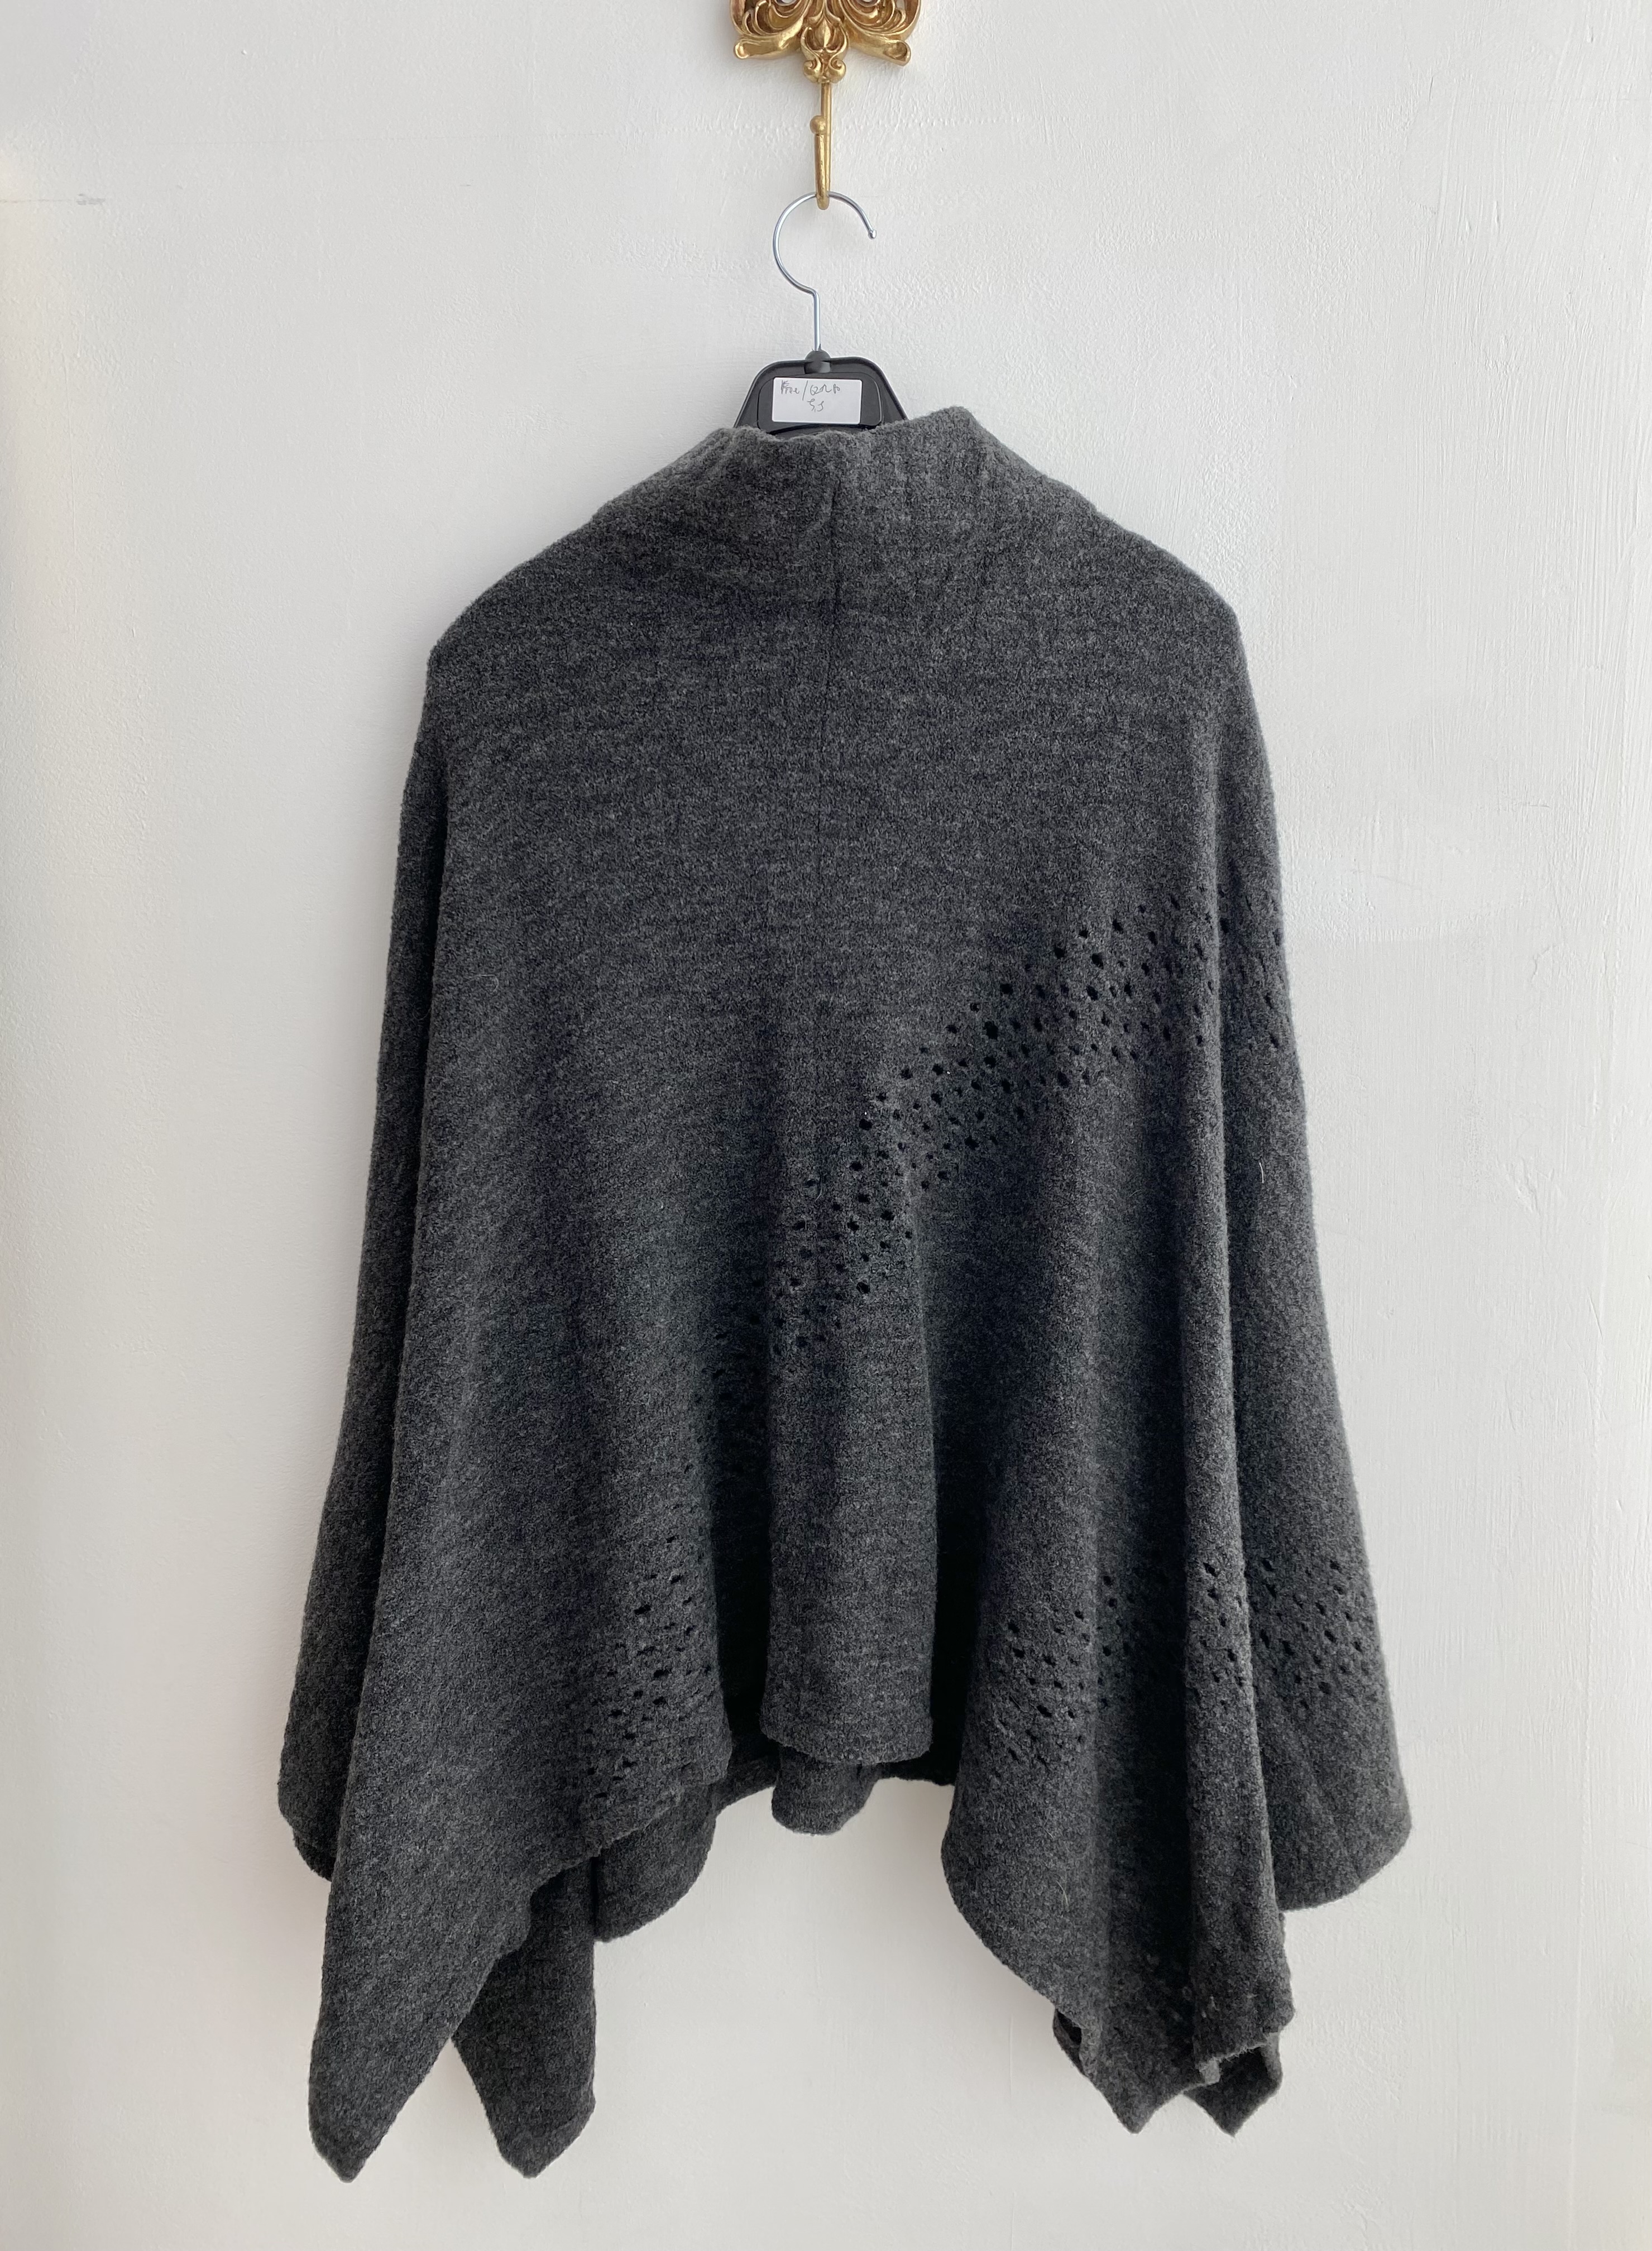 Grey see-through point poncho style knit